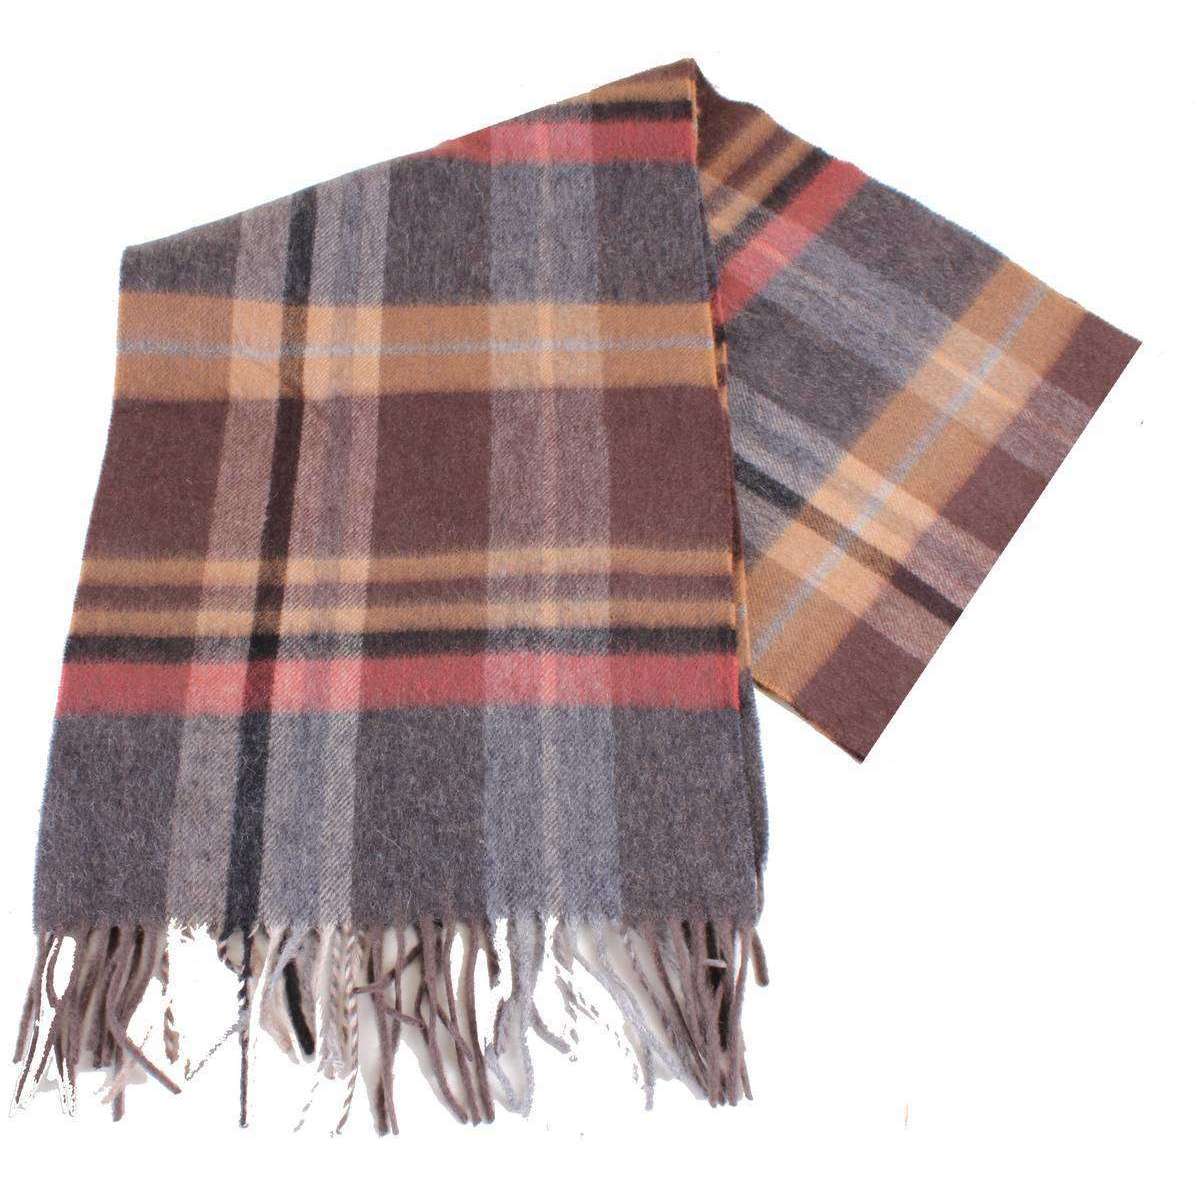 Bassin and Brown Cruyff Checked Wool Scarf - Brown/Chocolate